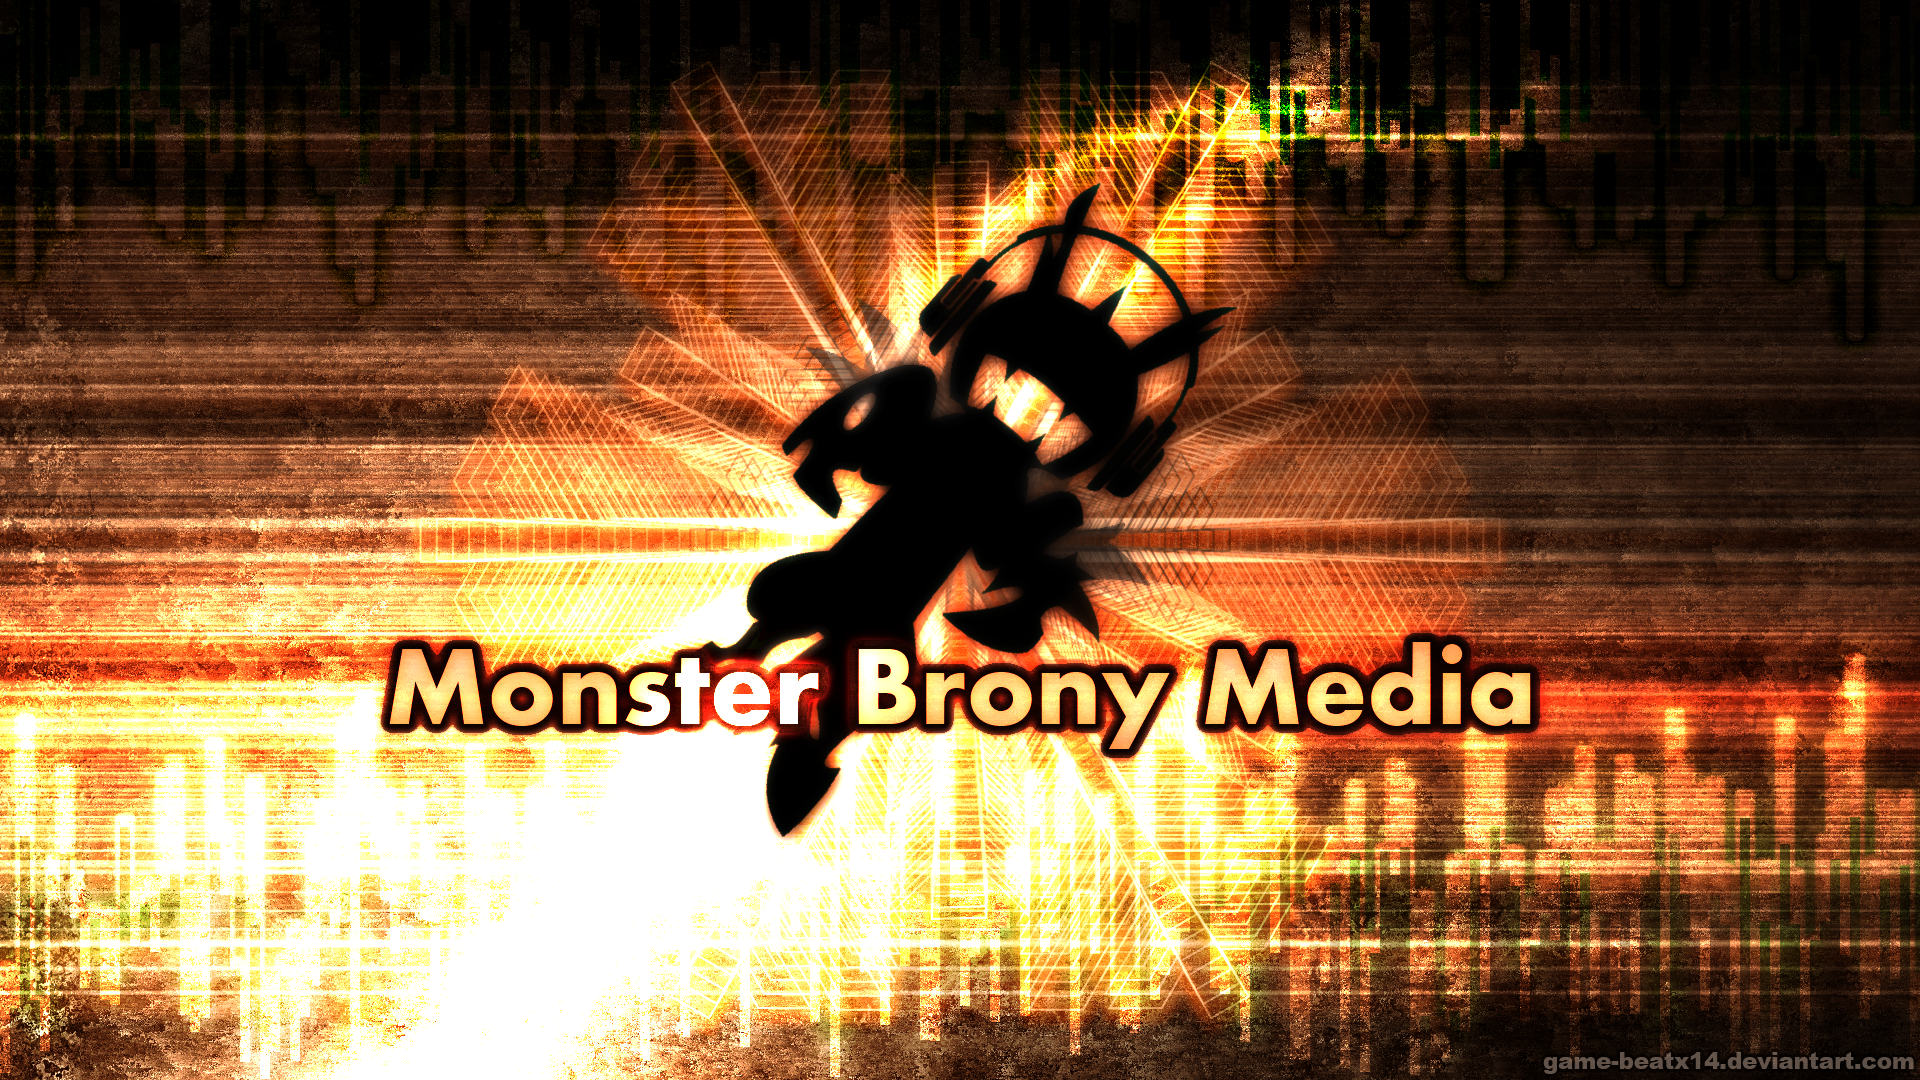 Monster Brony Media Wallpaper by Game-BeatX14 and VisualizationBrony